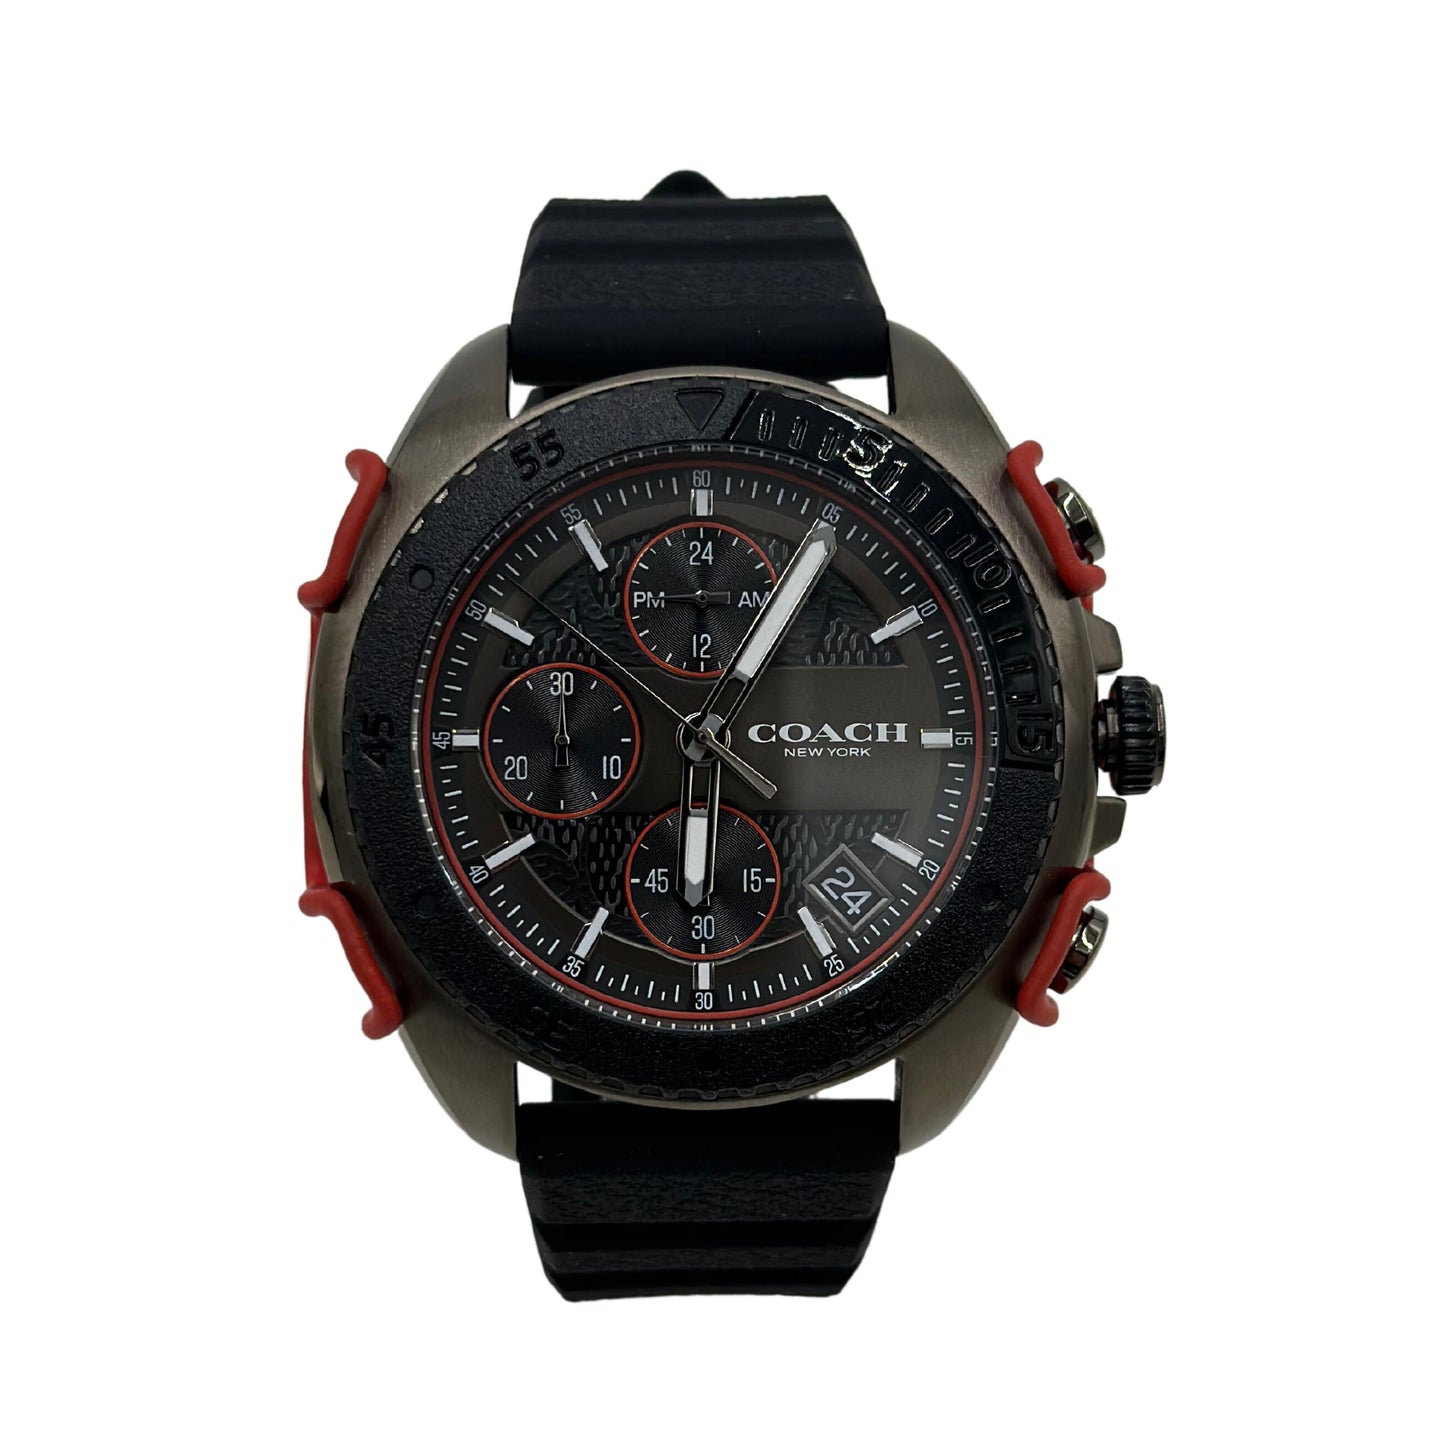 Coach Chronograph Black Silicone Band 45 mm Case Men's Watch - 14602453 - 885997347693 